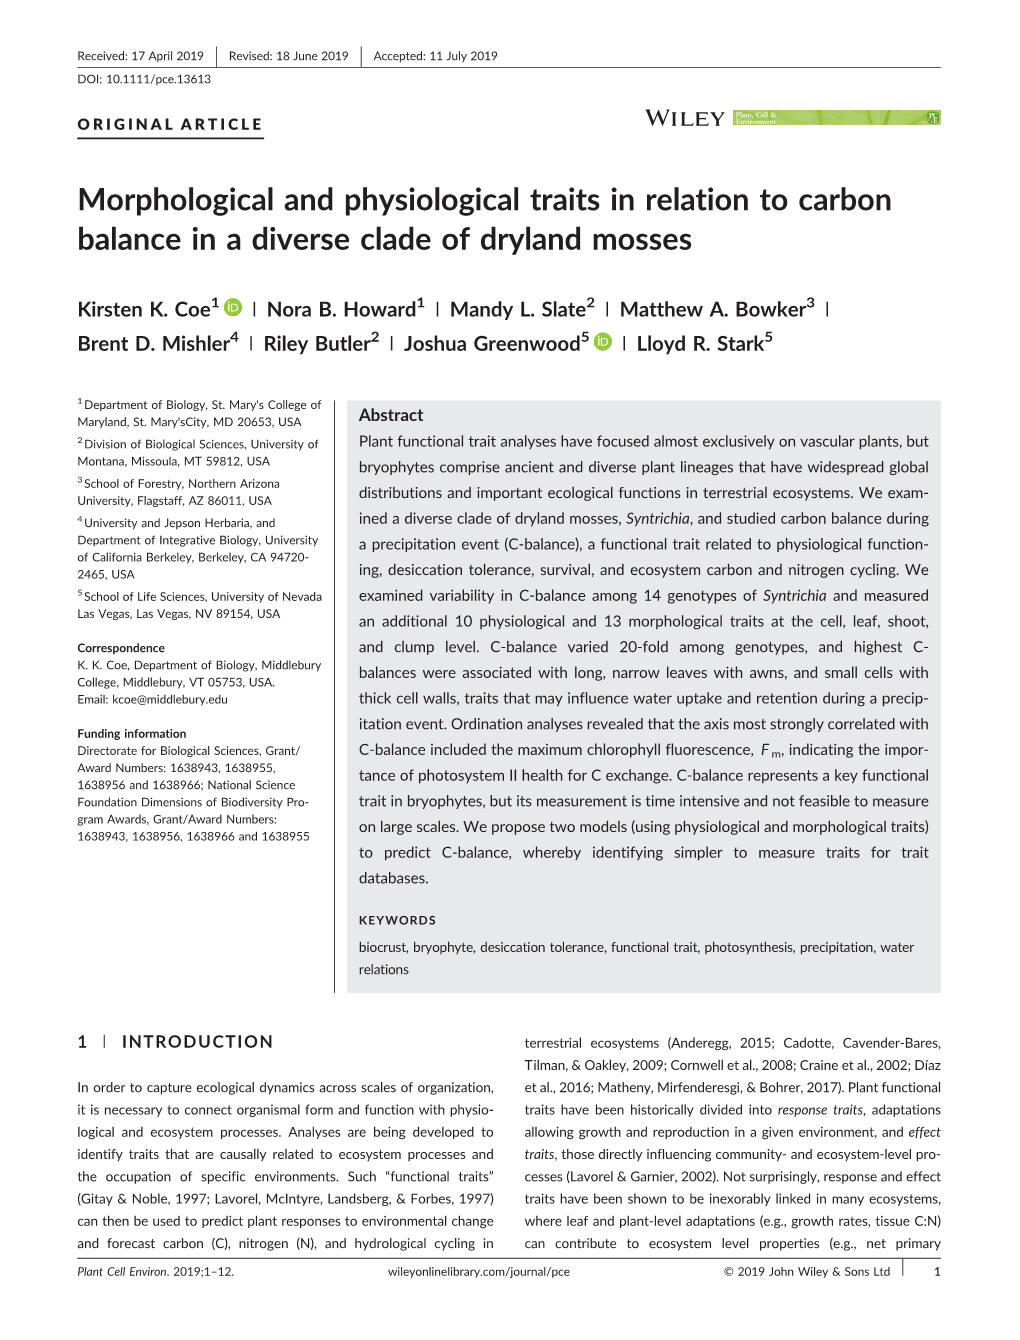 Morphological and Physiological Traits in Relation to Carbon Balance in a Diverse Clade of Dryland Mosses